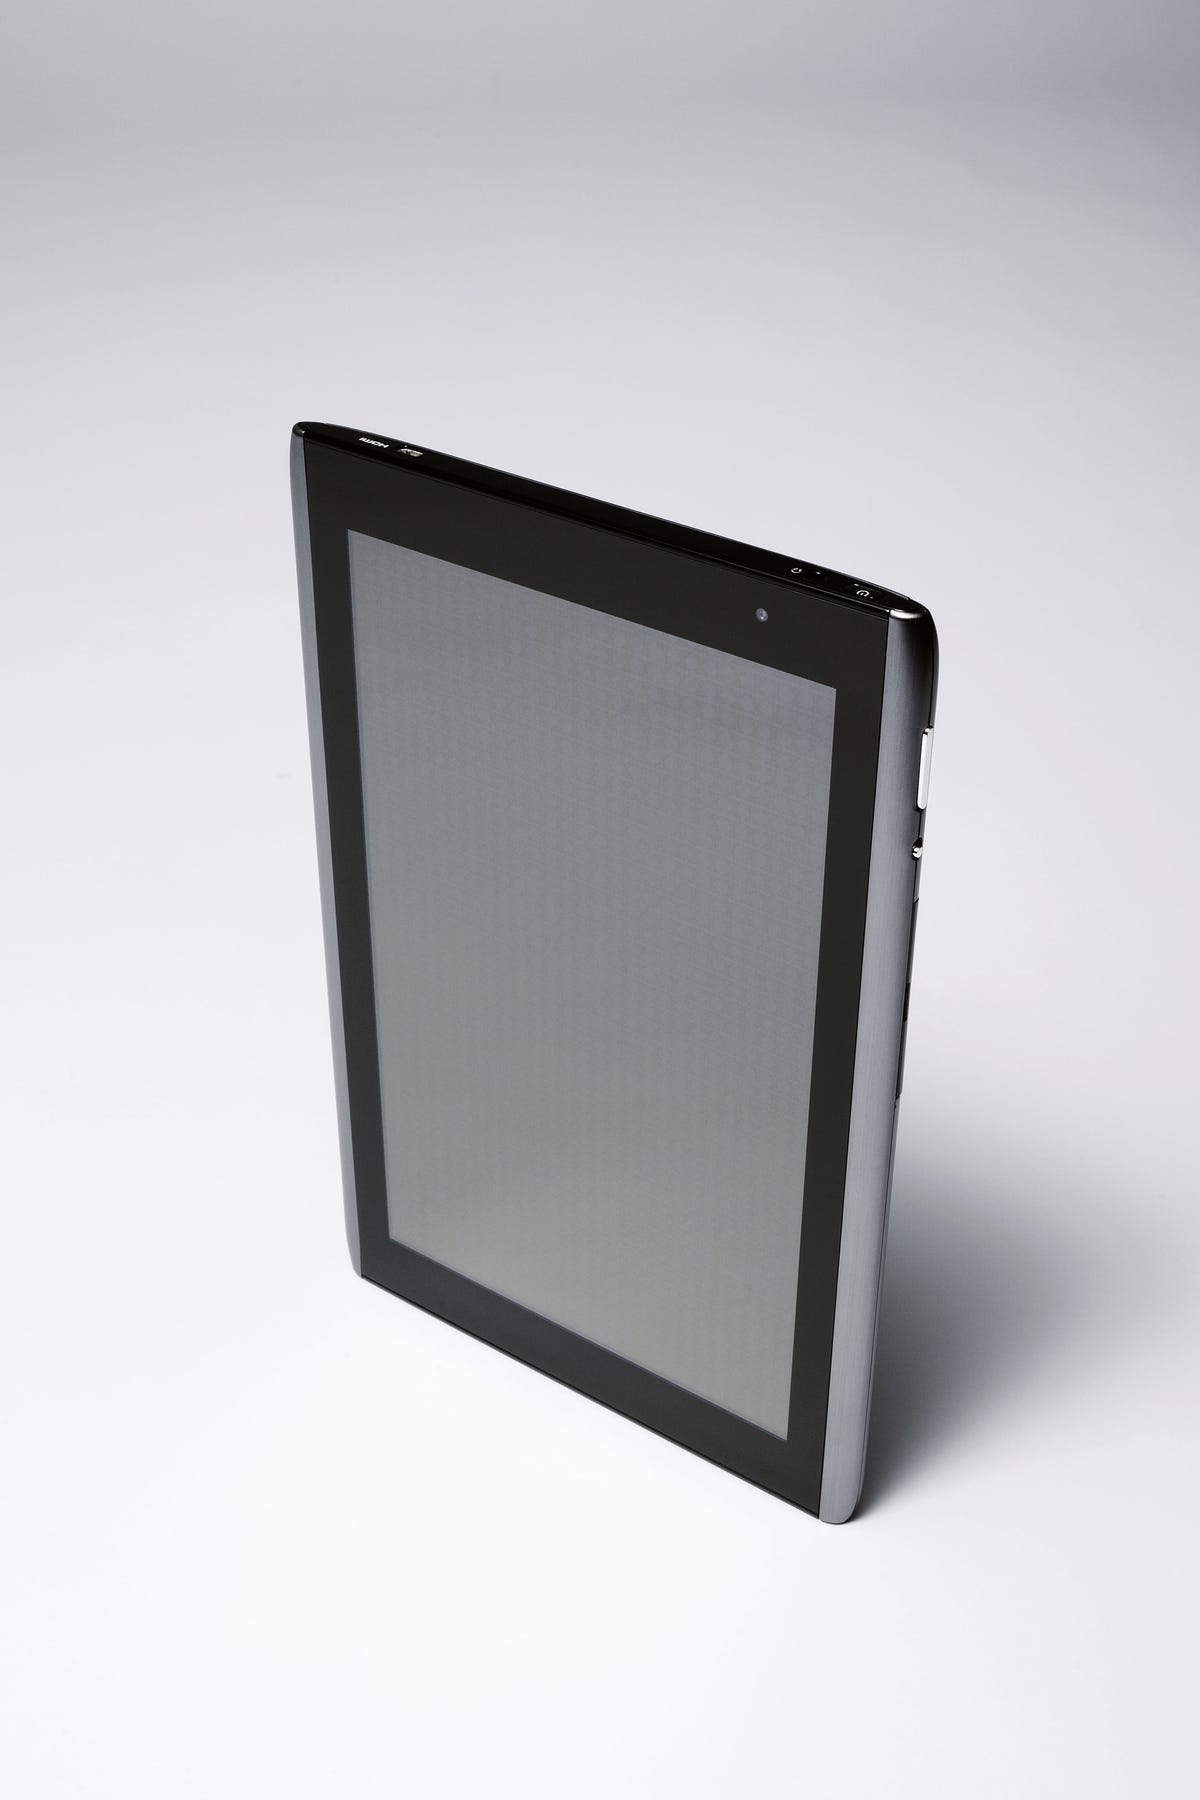 Acer_Android_Tablet_03.jpg